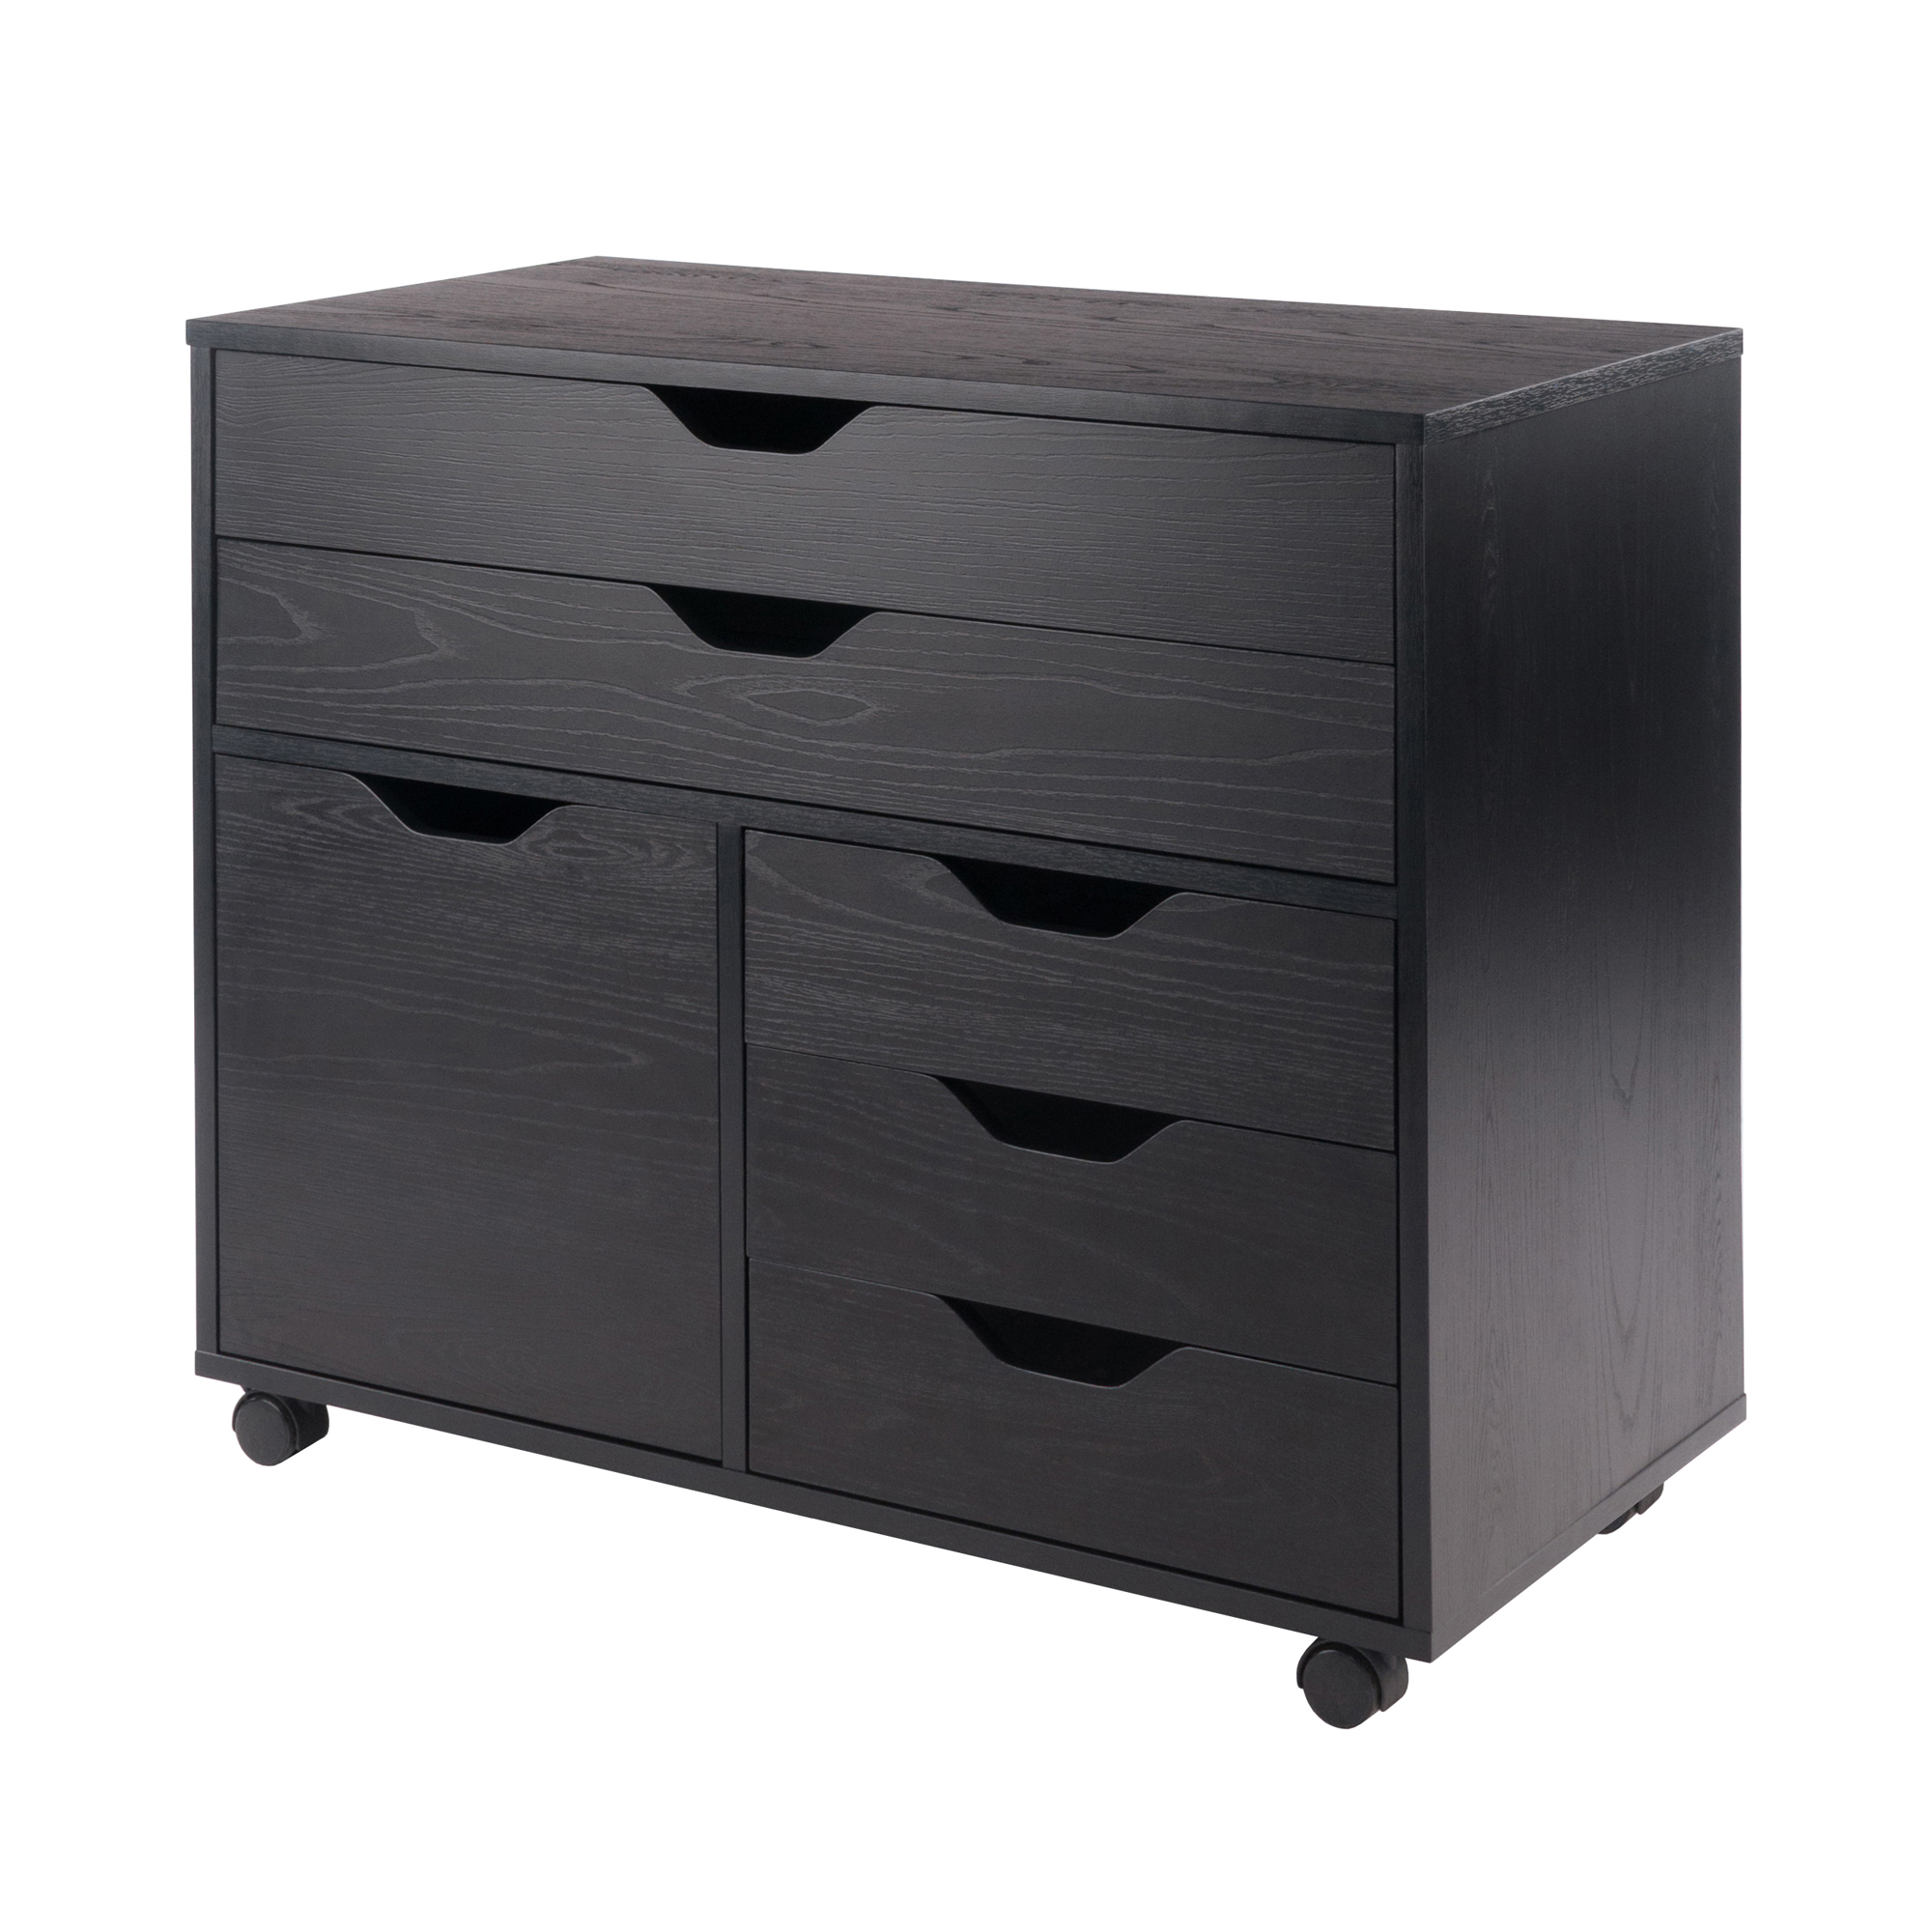 Contemporary Home Living 30.75" Black 3 Section Mobile Filing Cabinet - image 1 of 1